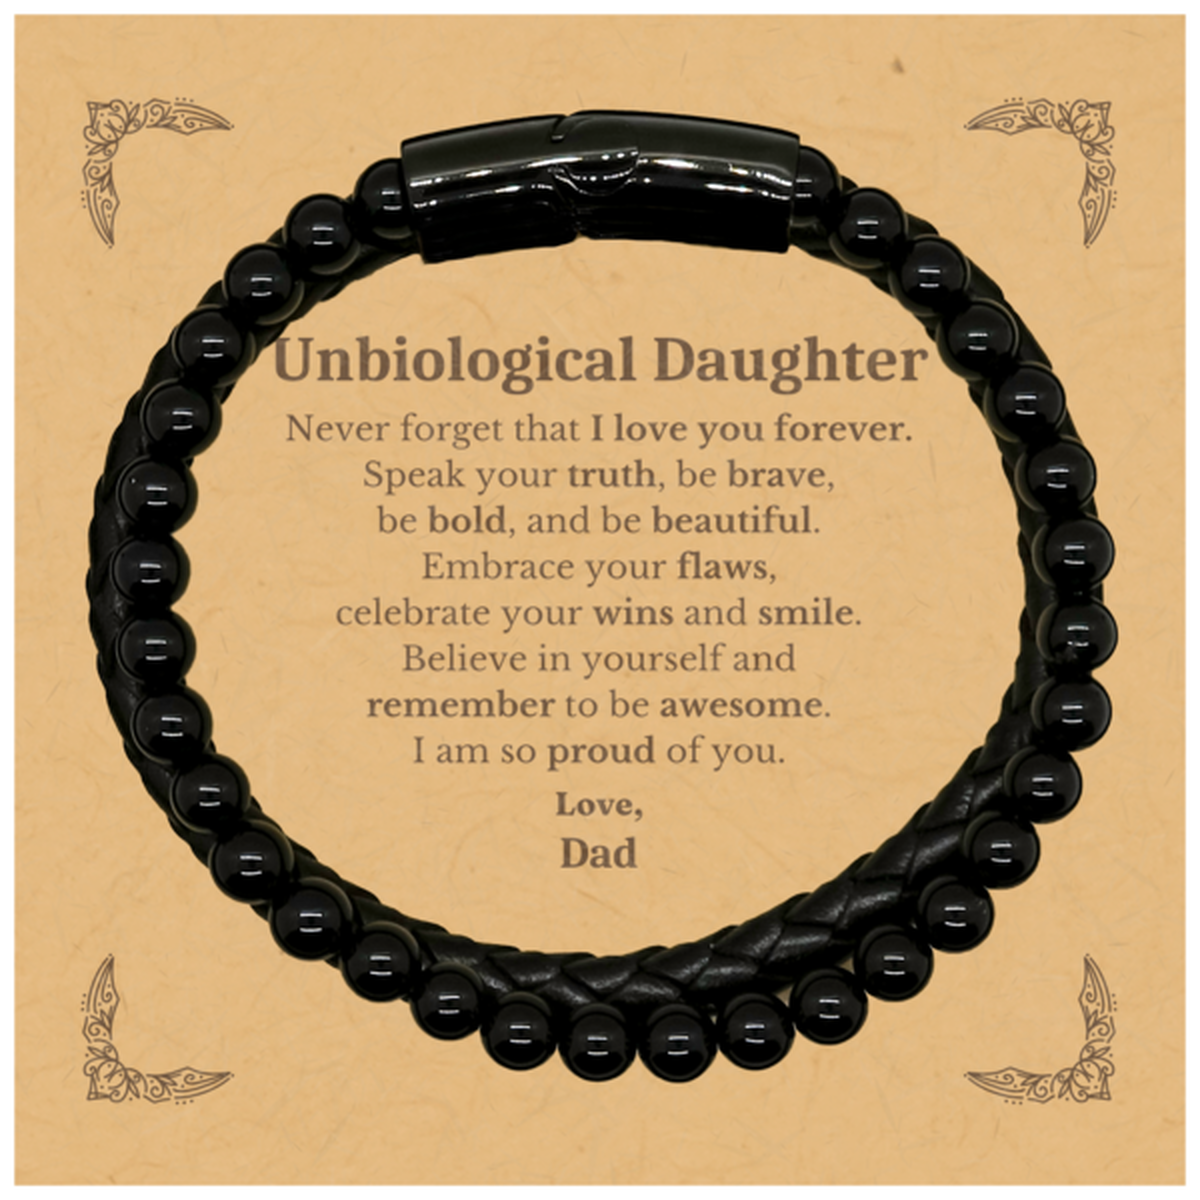 Unbiological Daughter Stone Leather Bracelets, Never forget that I love you forever, Inspirational Unbiological Daughter Birthday Unique Gifts From Dad